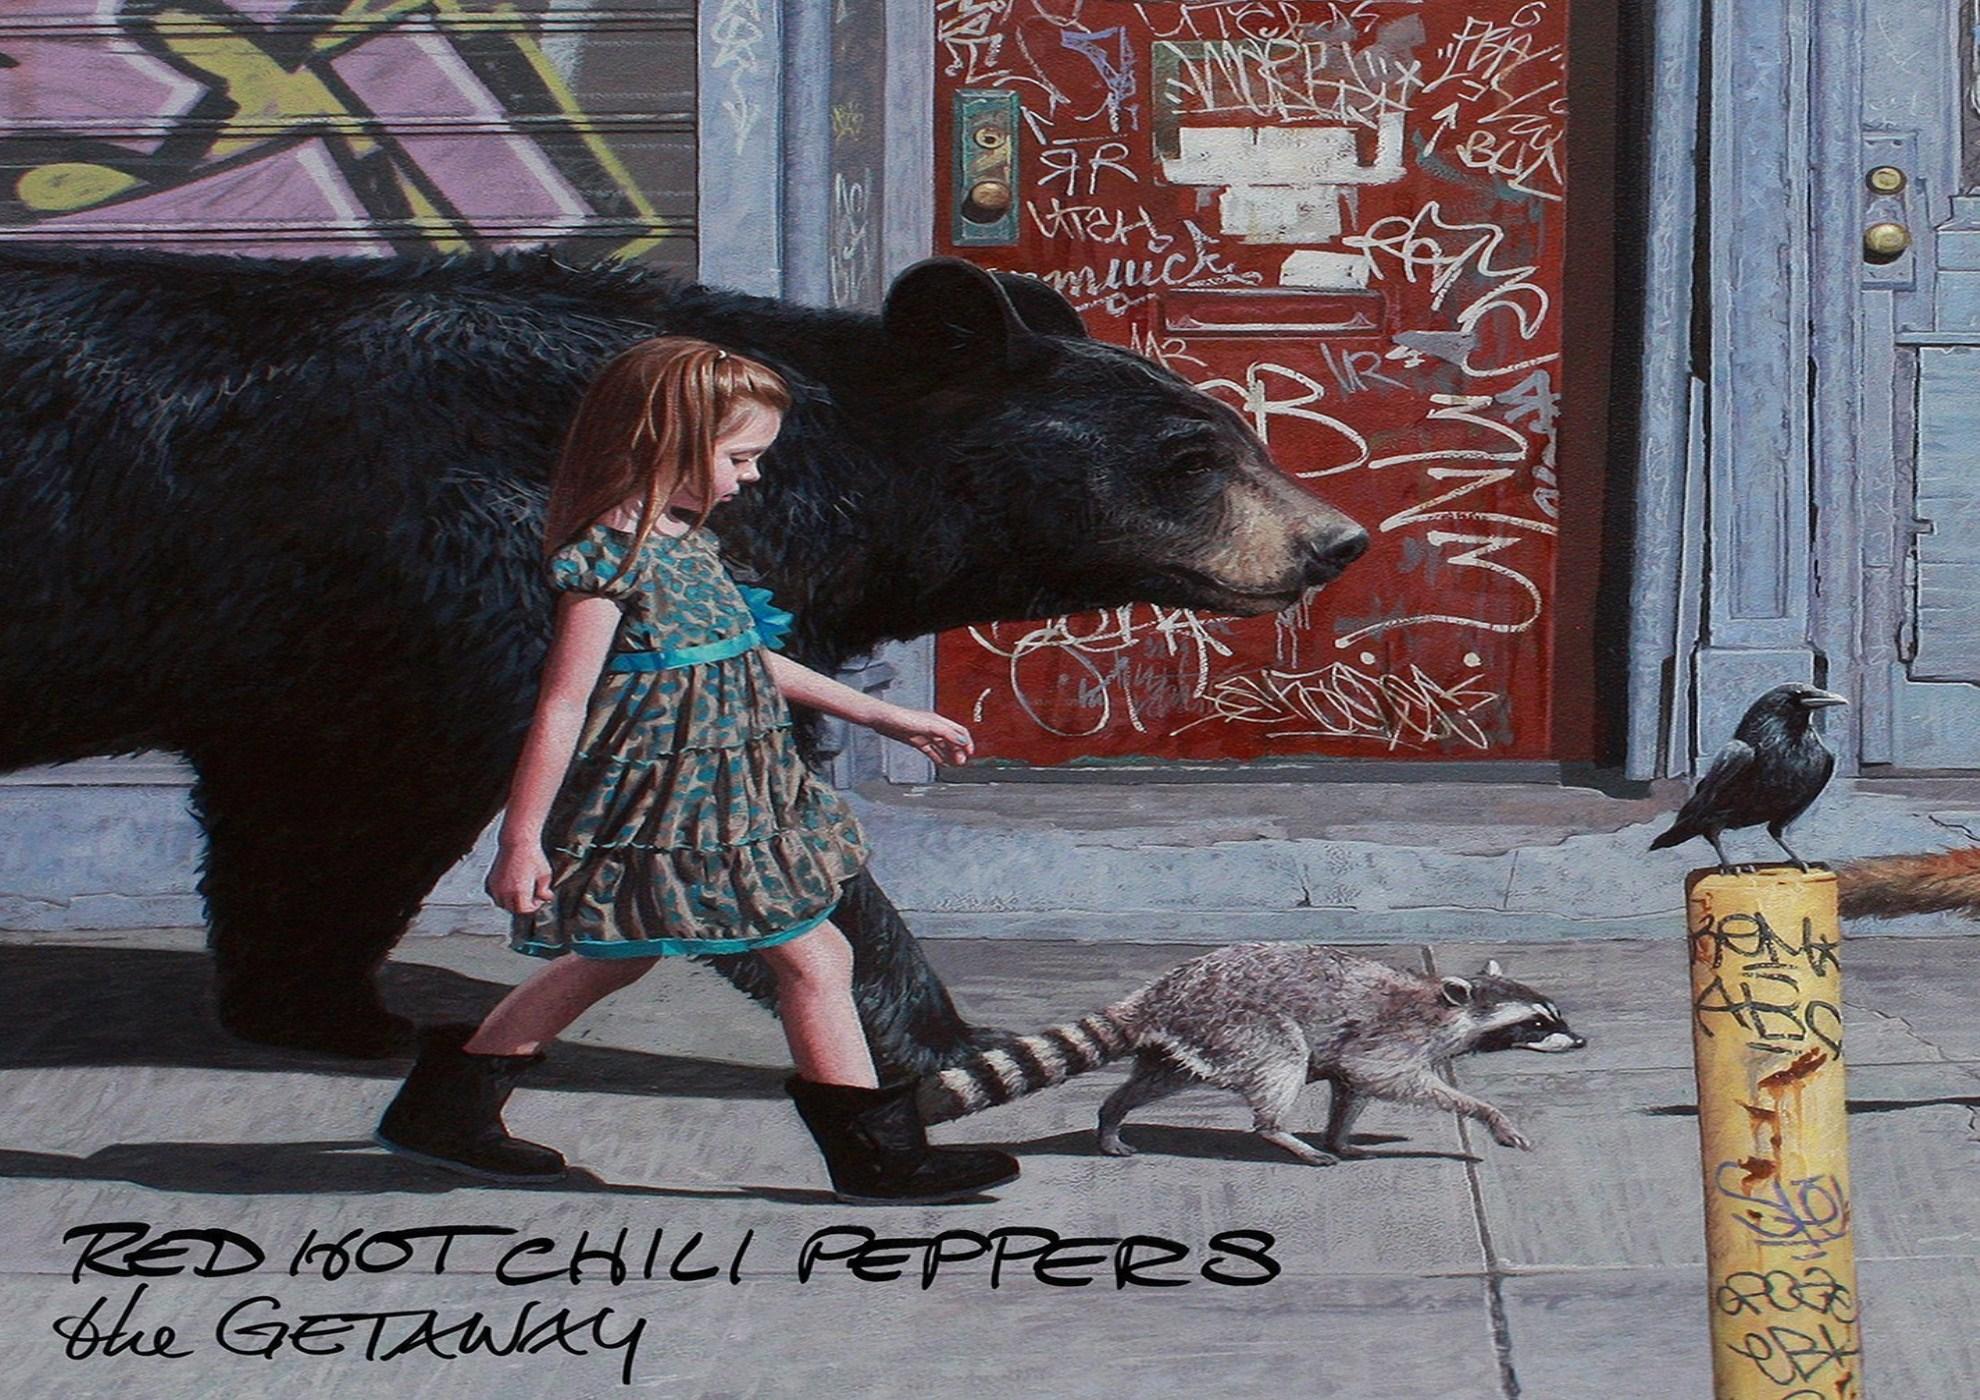 Chili peppers dark necessities. Red hot Chili Peppers the Getaway 2016. The Getaway альбом Red hot Chili Peppers. Red hot Chili Peppers - the Getaway - 2016 - LP. The Getaway Red hot Chili Peppers обложка.